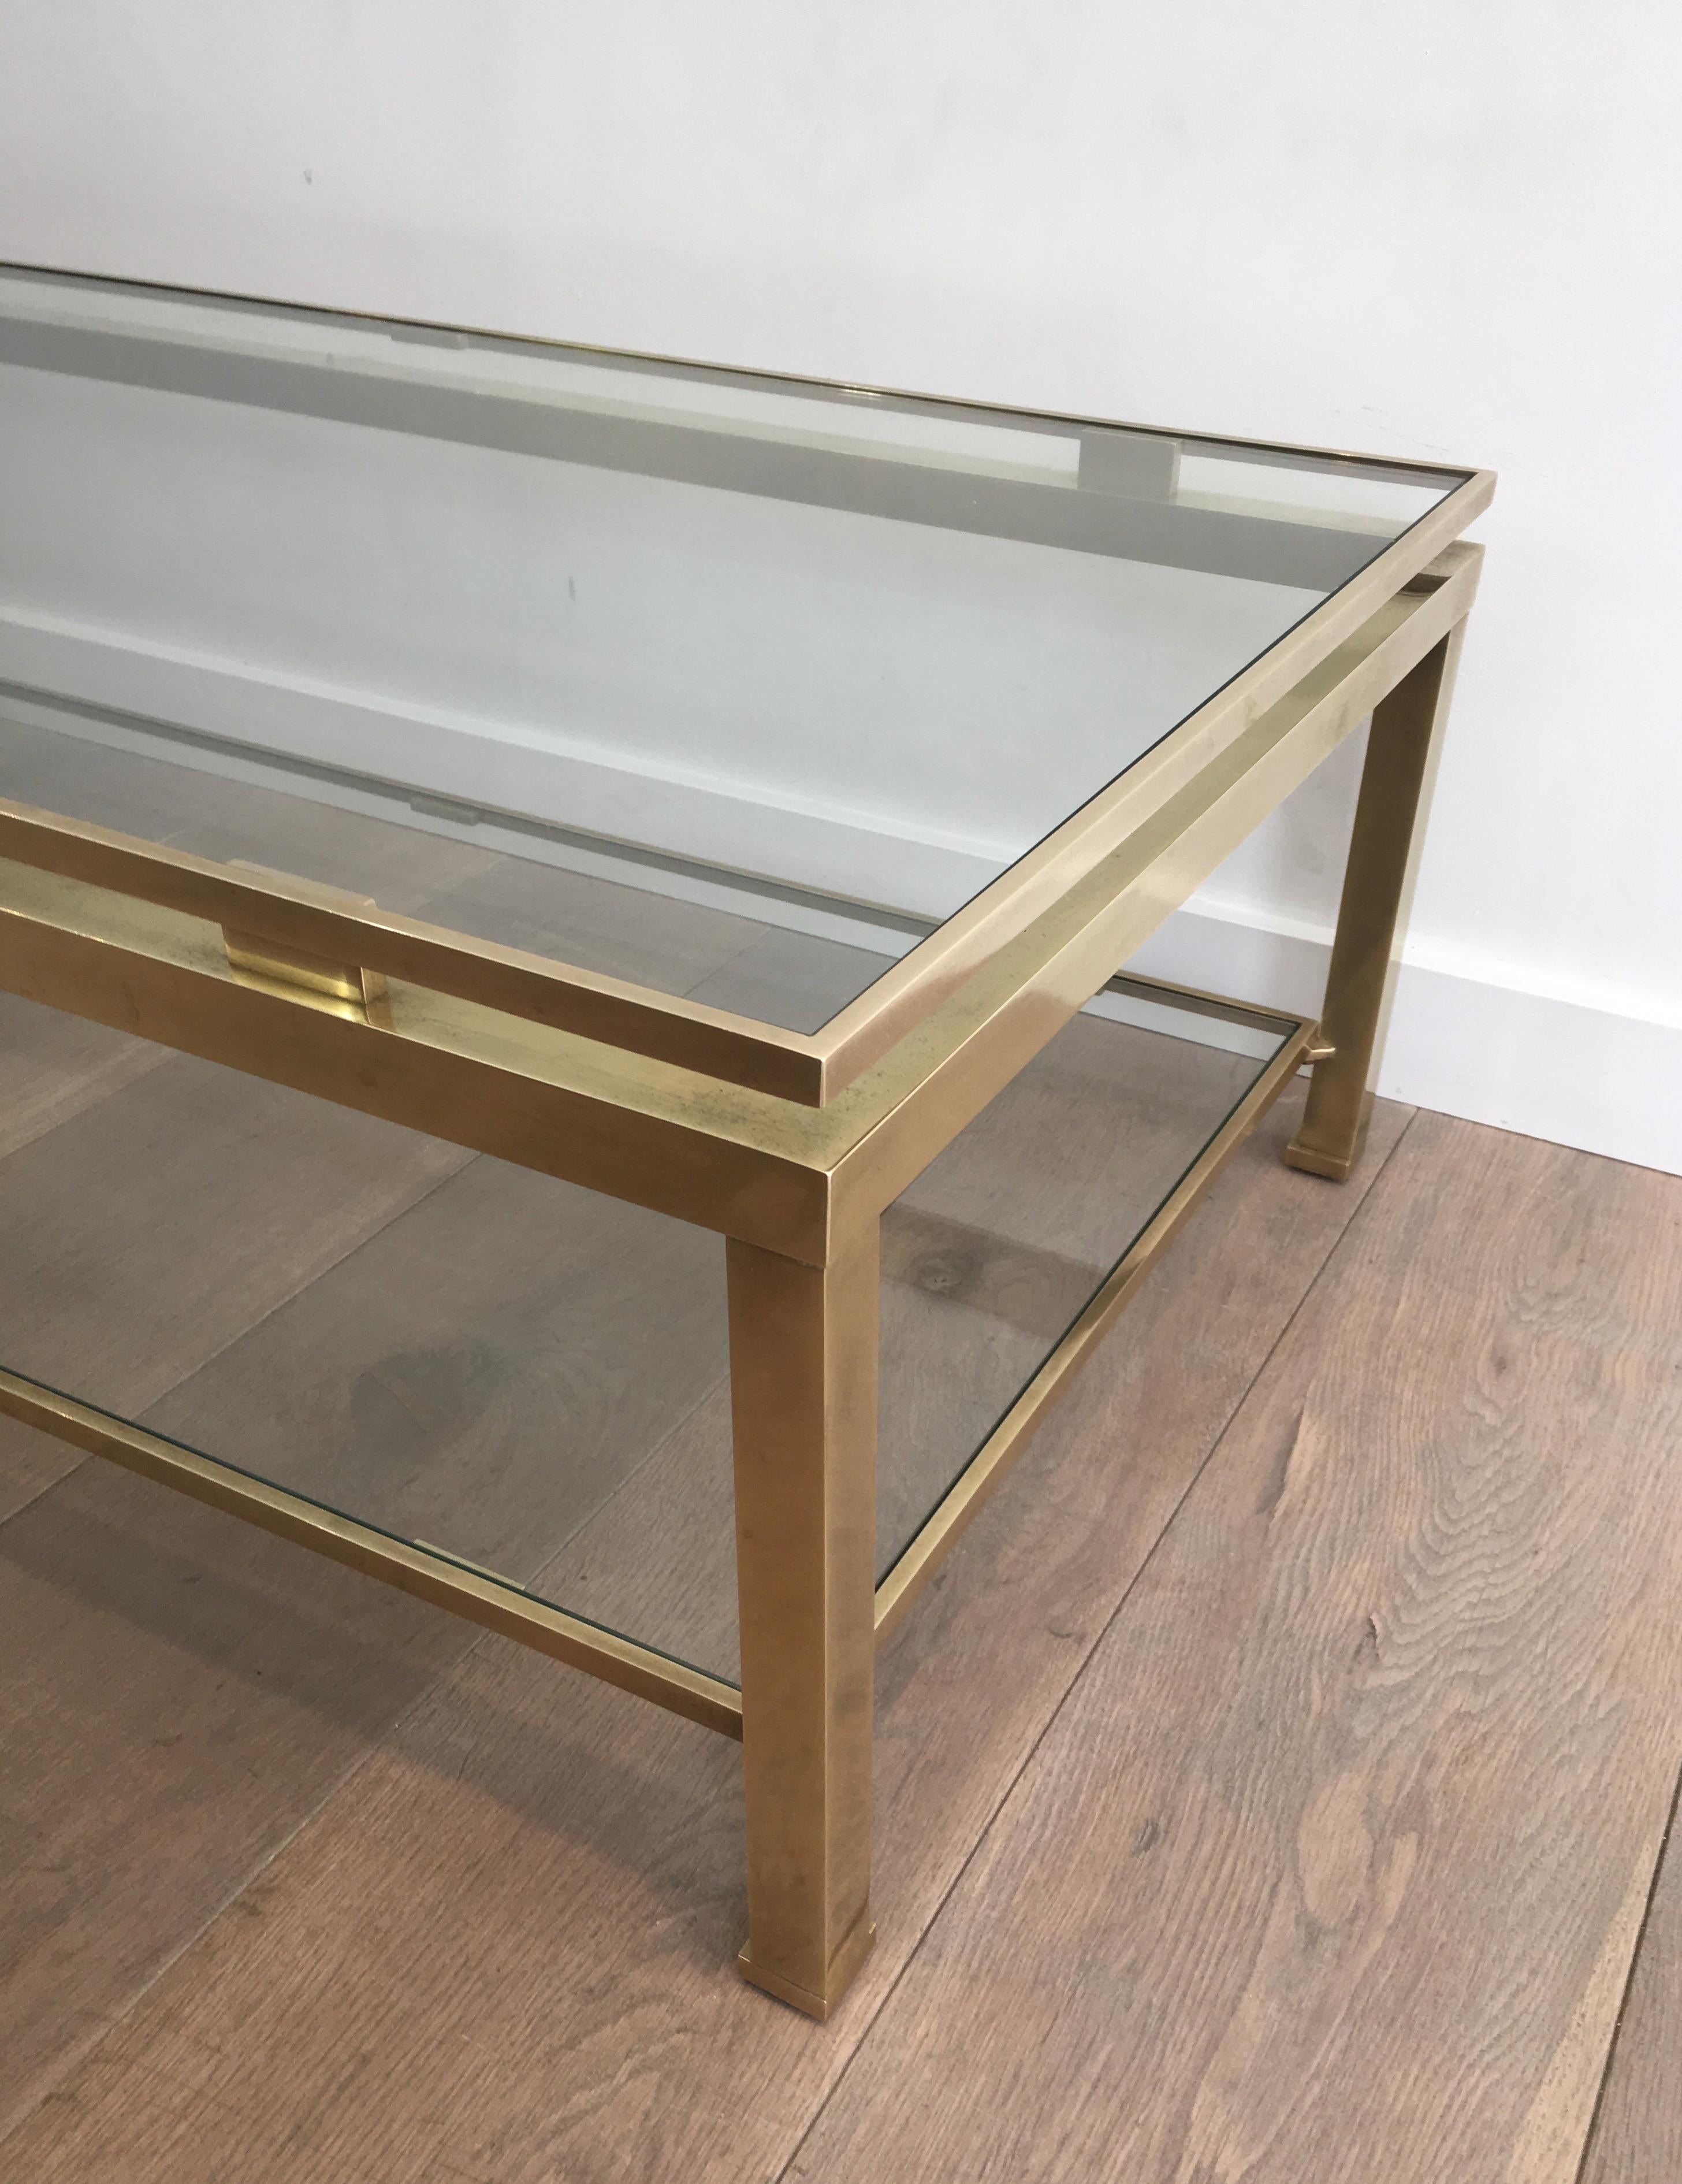 Late 20th Century Guy Lefèvre for Maison Jansen, Brass Coffee Table with 2 Glass Shelves